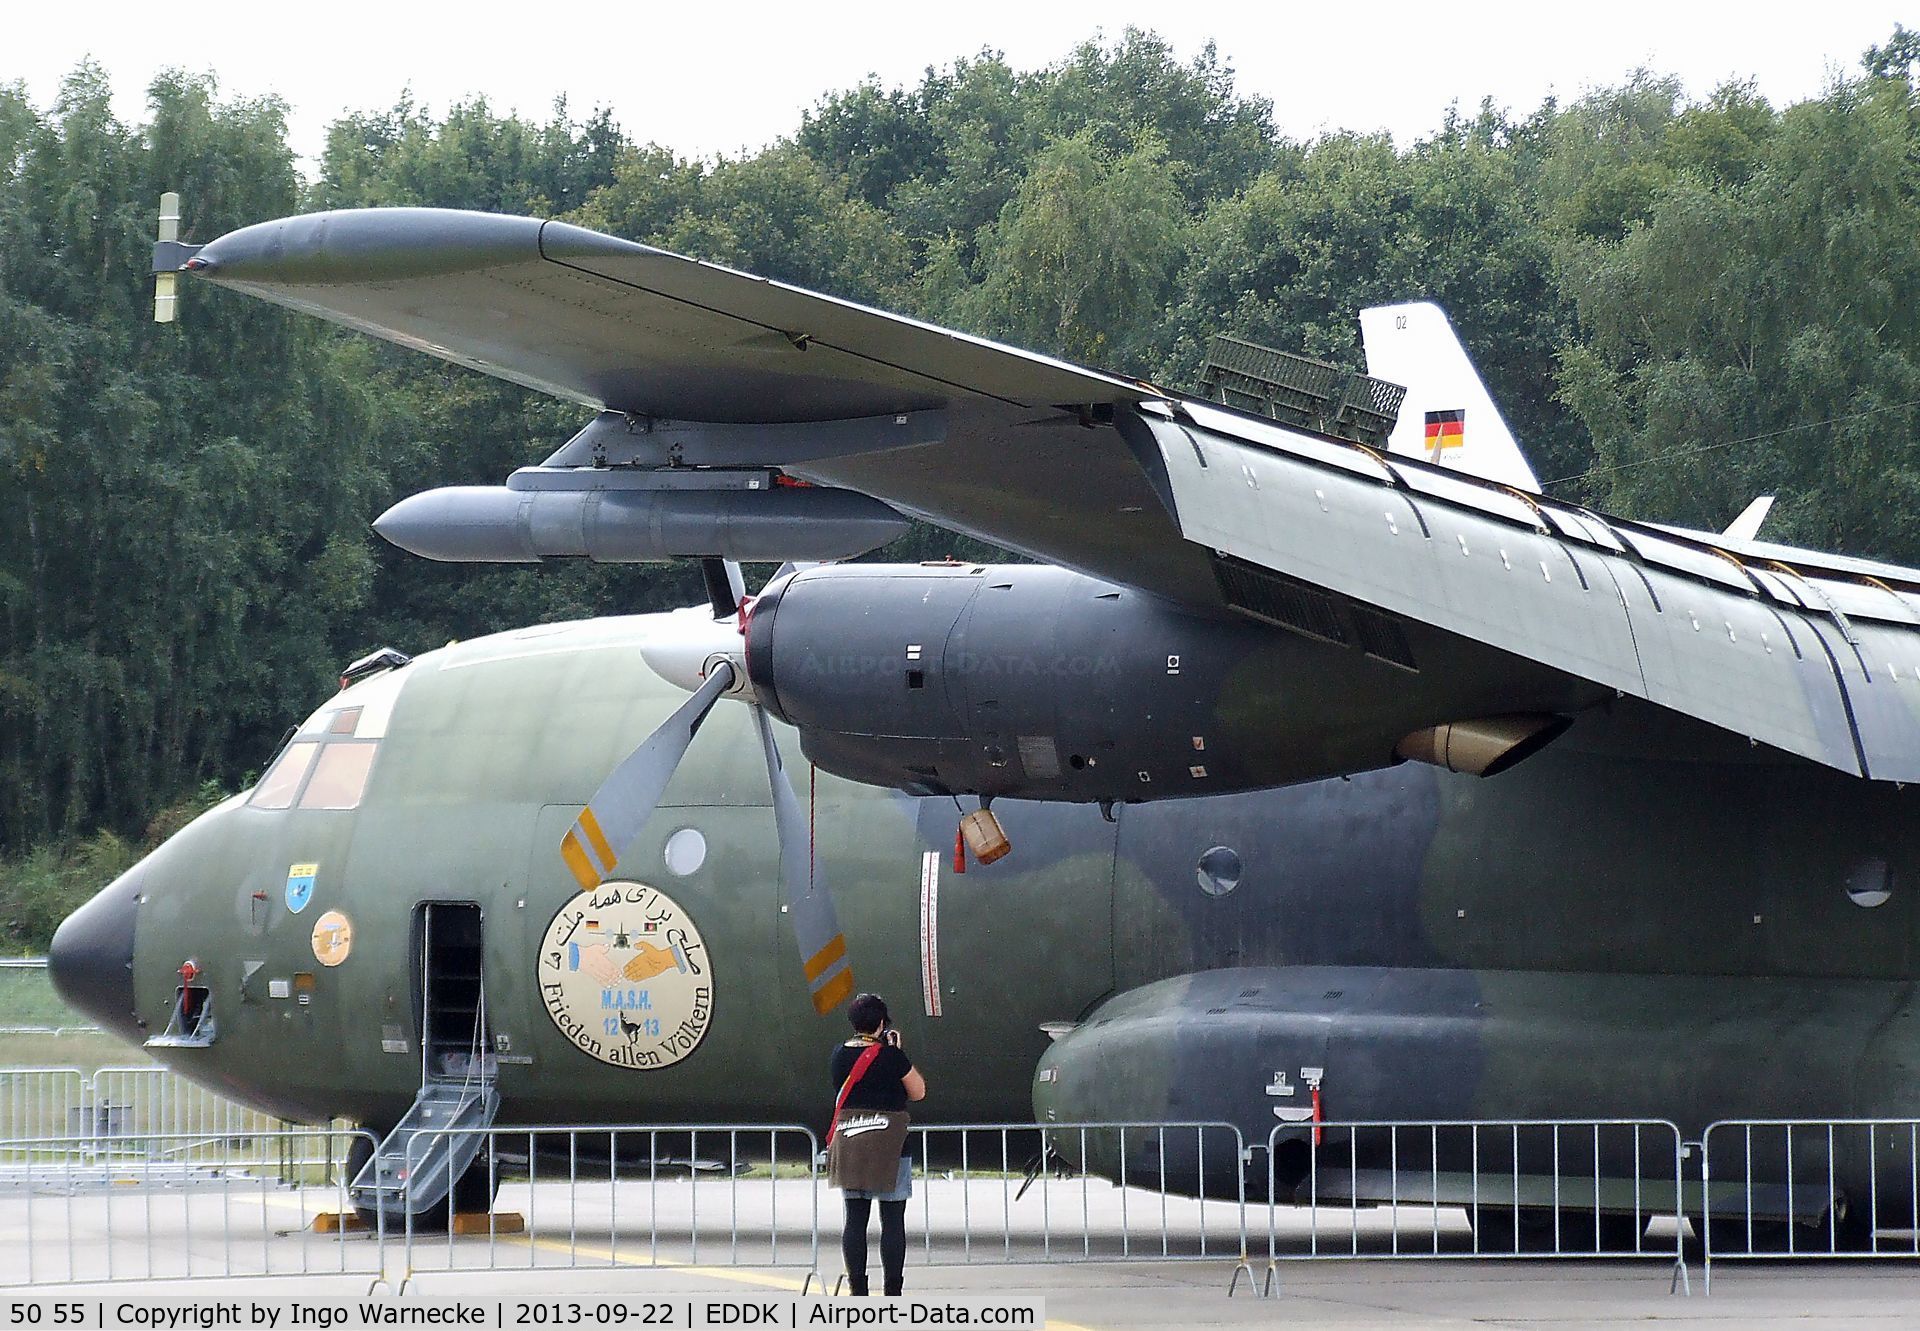 50 55, 1969 Transall C-160D C/N D77, Transall C-160D of the German Air Force (Luftwaffe) at the DLR 2013 air and space day on the side of Cologne airport